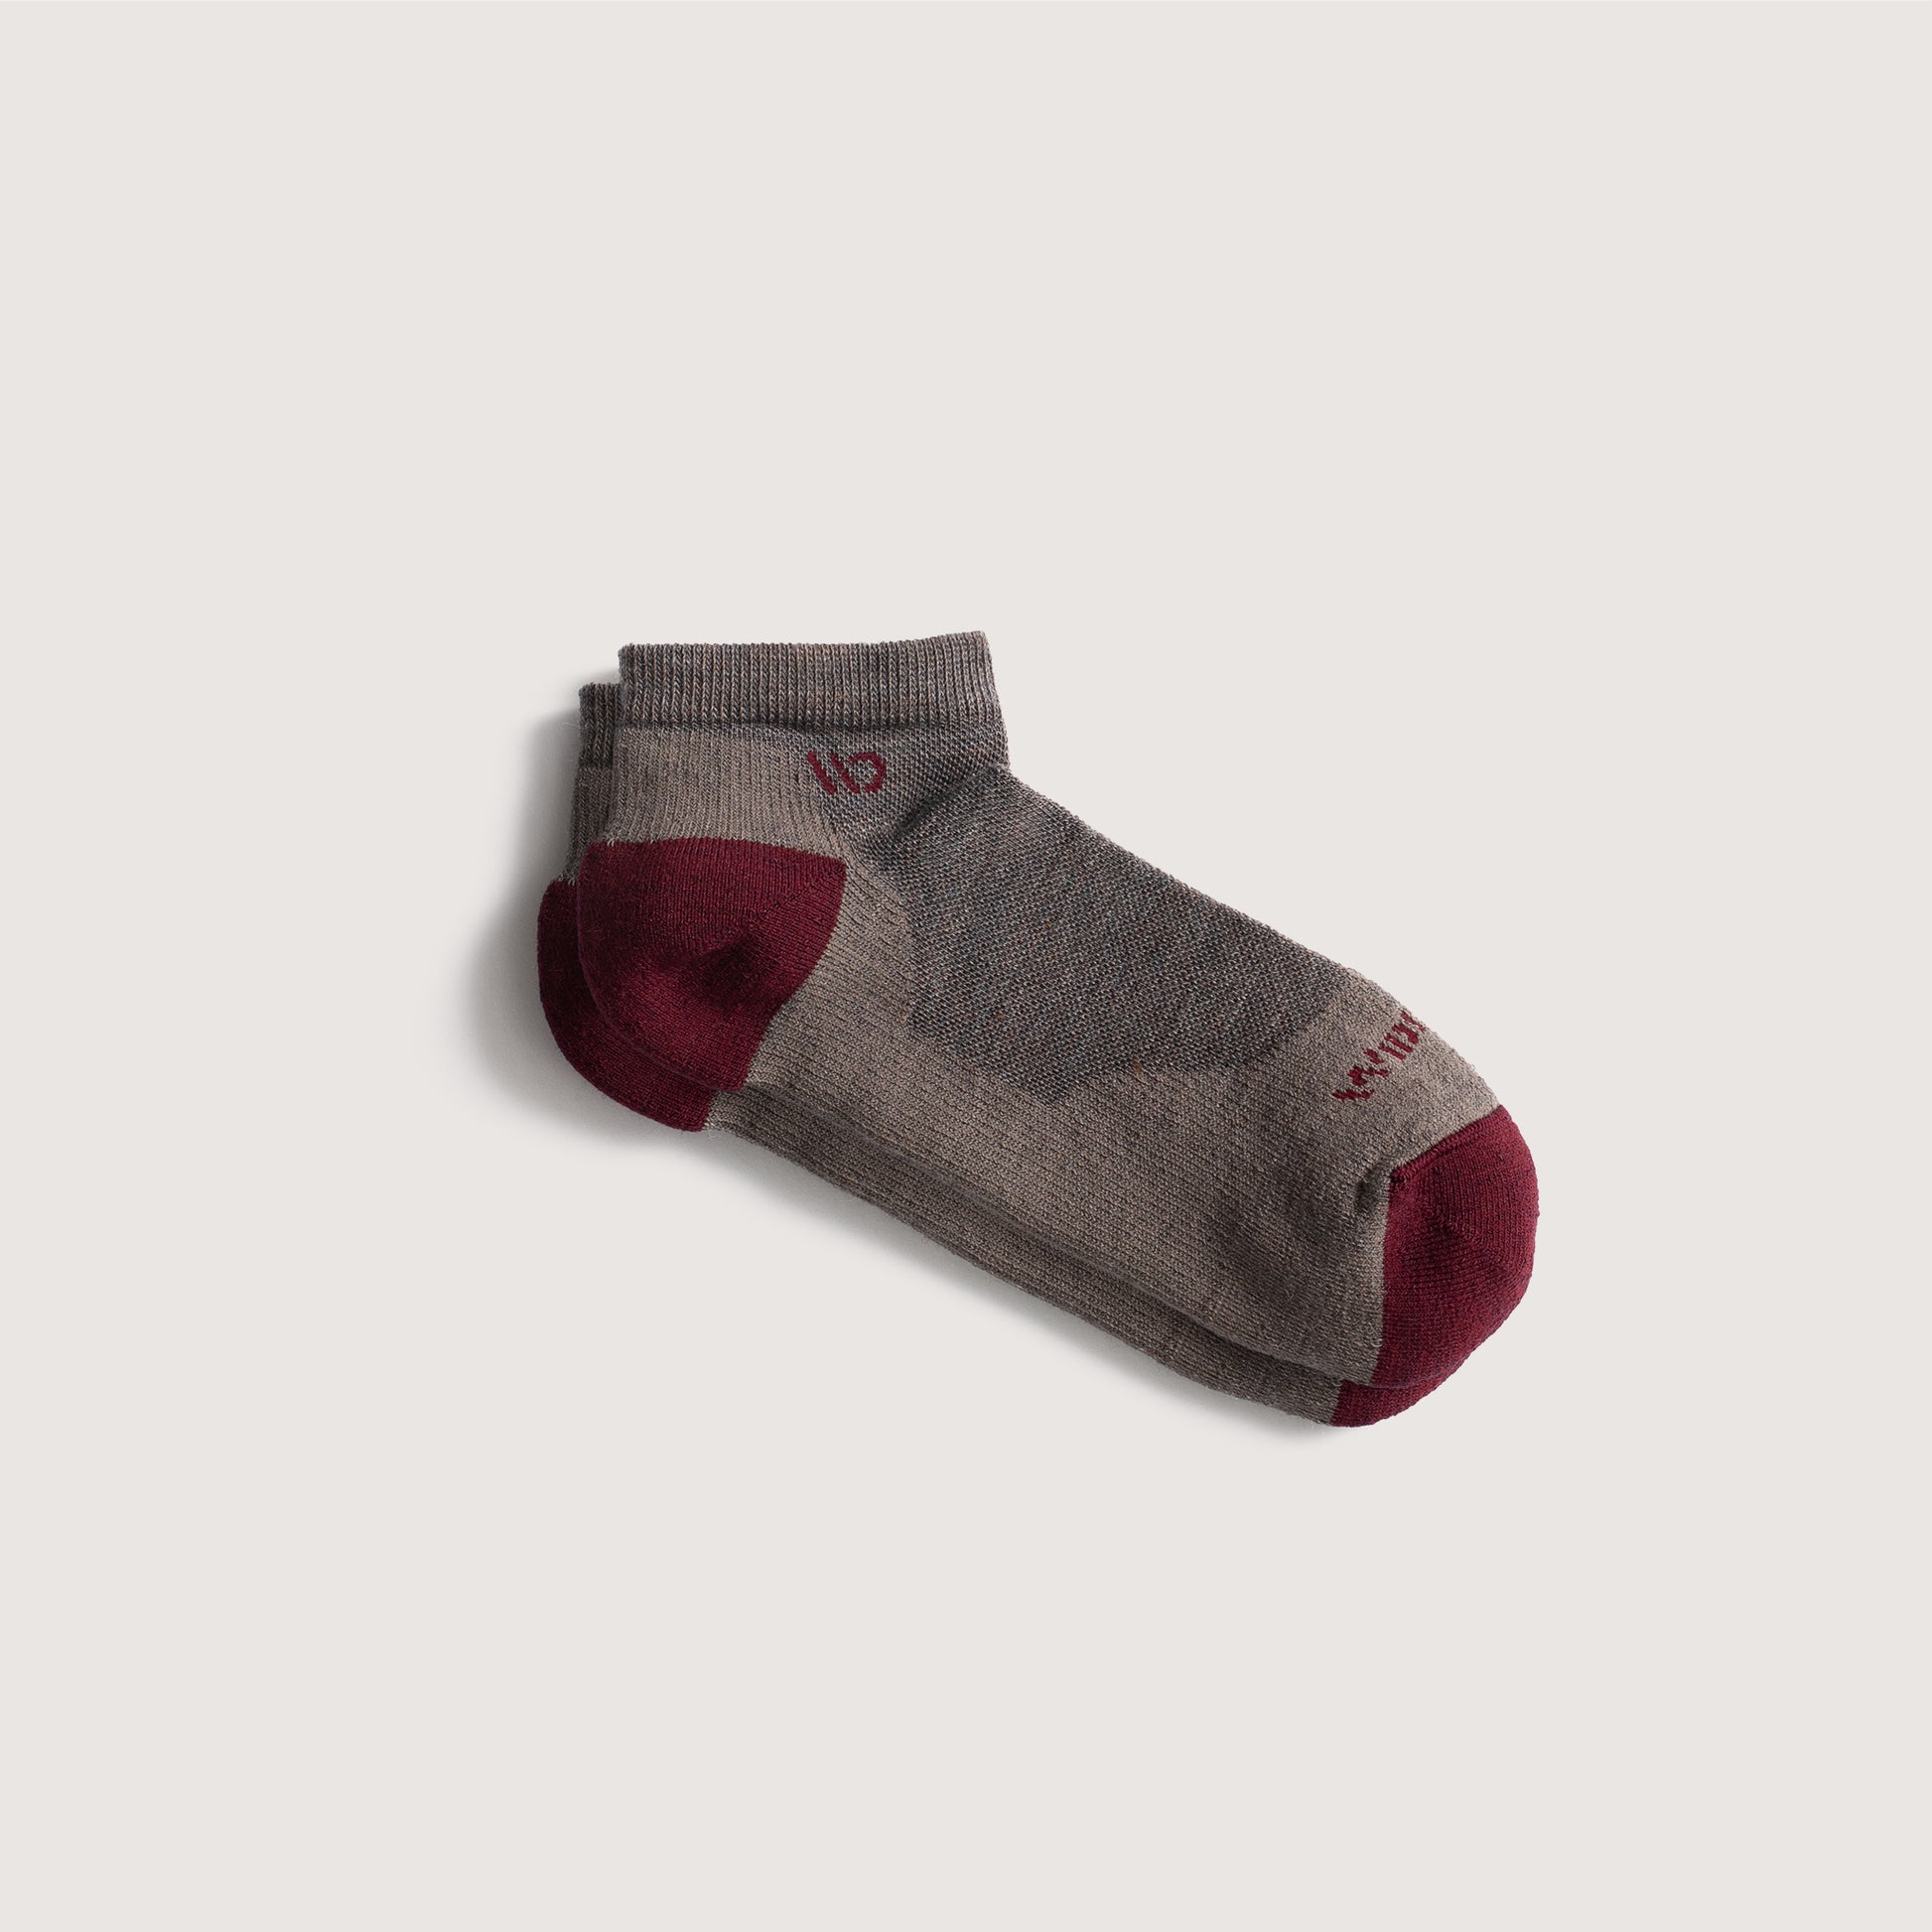 Flat socks featuring maroon heel/toe and logo, with taupe body--Taupe